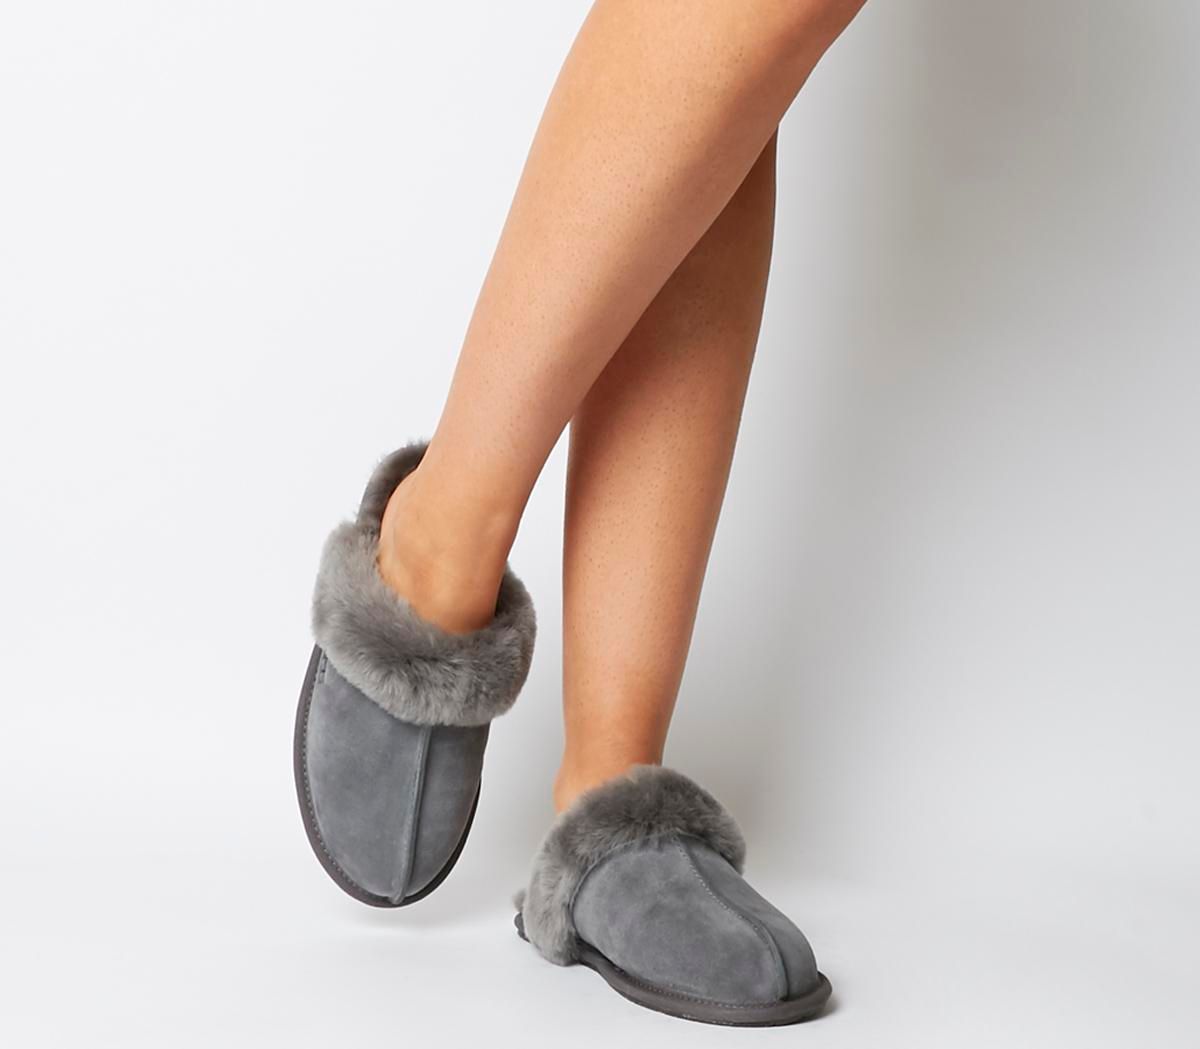 ugg open slippers